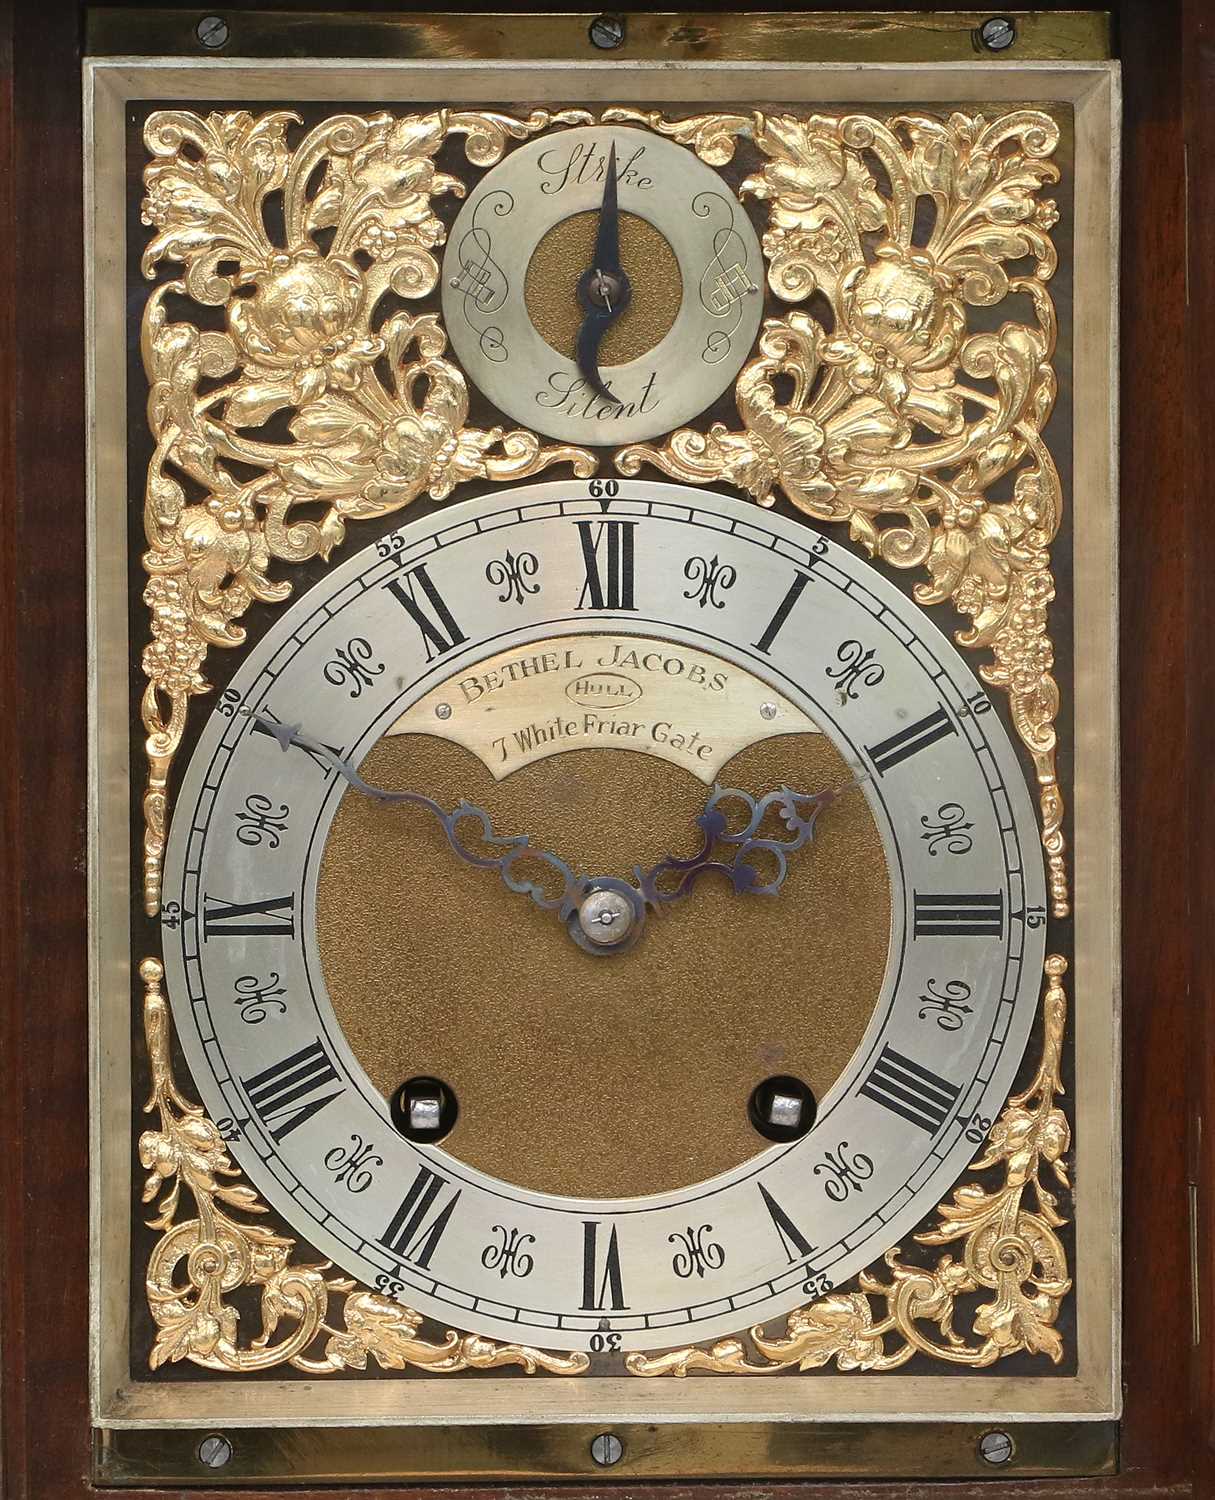 A Walnut Quarter Striking Table Clock, signed Bethel Jacobs, Hull, 7 White Friar Gate, circa 1890, - Image 3 of 16